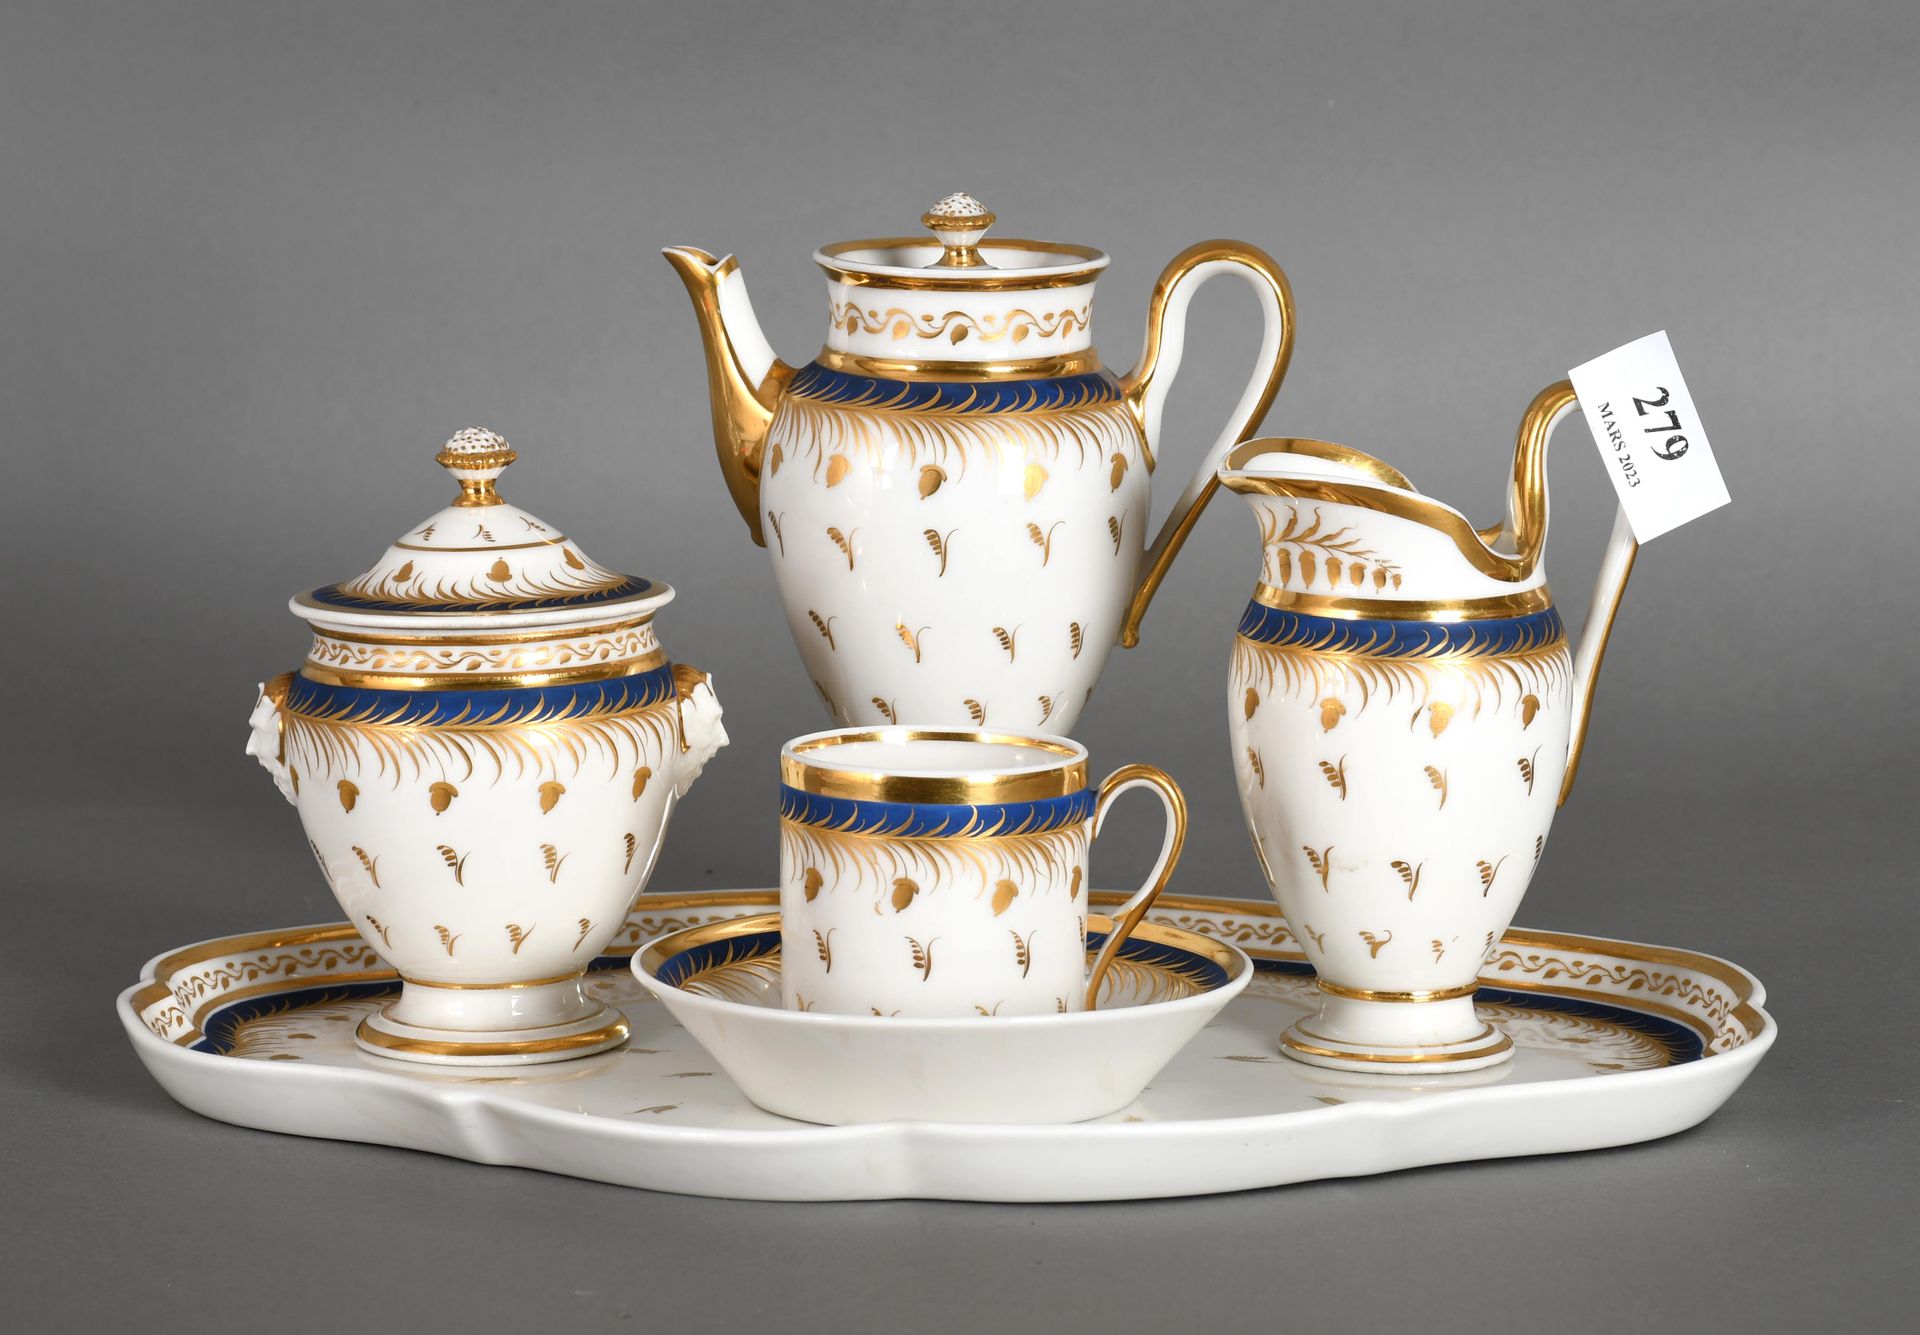 Null White, blue and gold porcelain selfish service with Empire decoration